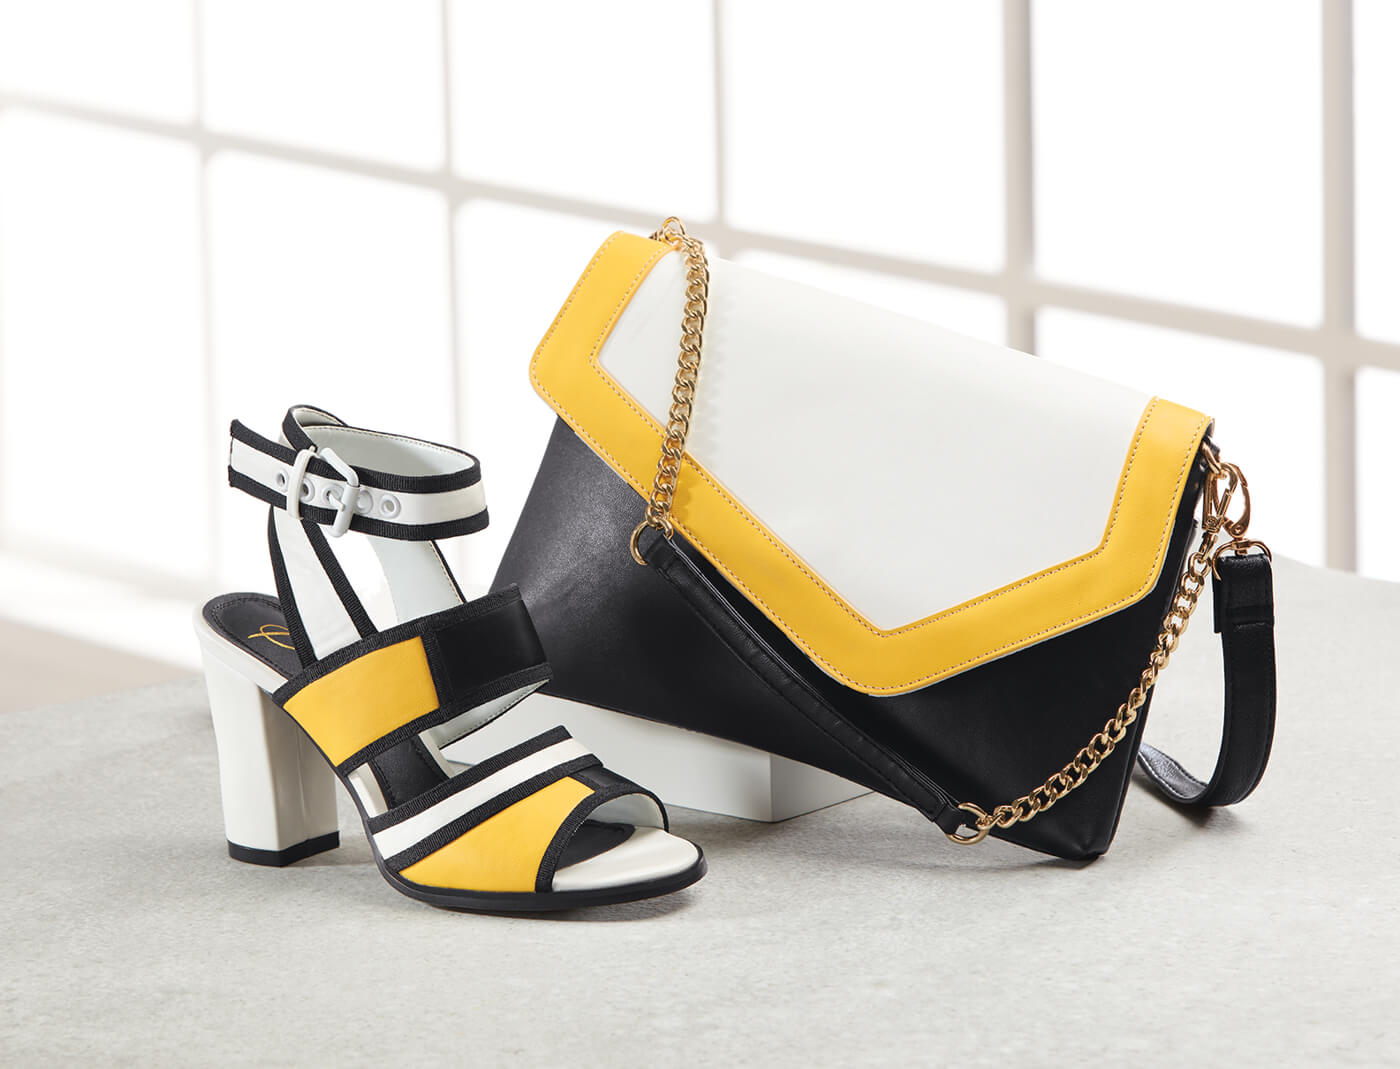 A colorblock envelope clutch in white, black and yellow, with a matching ankle strap sandal with a chunky heel.